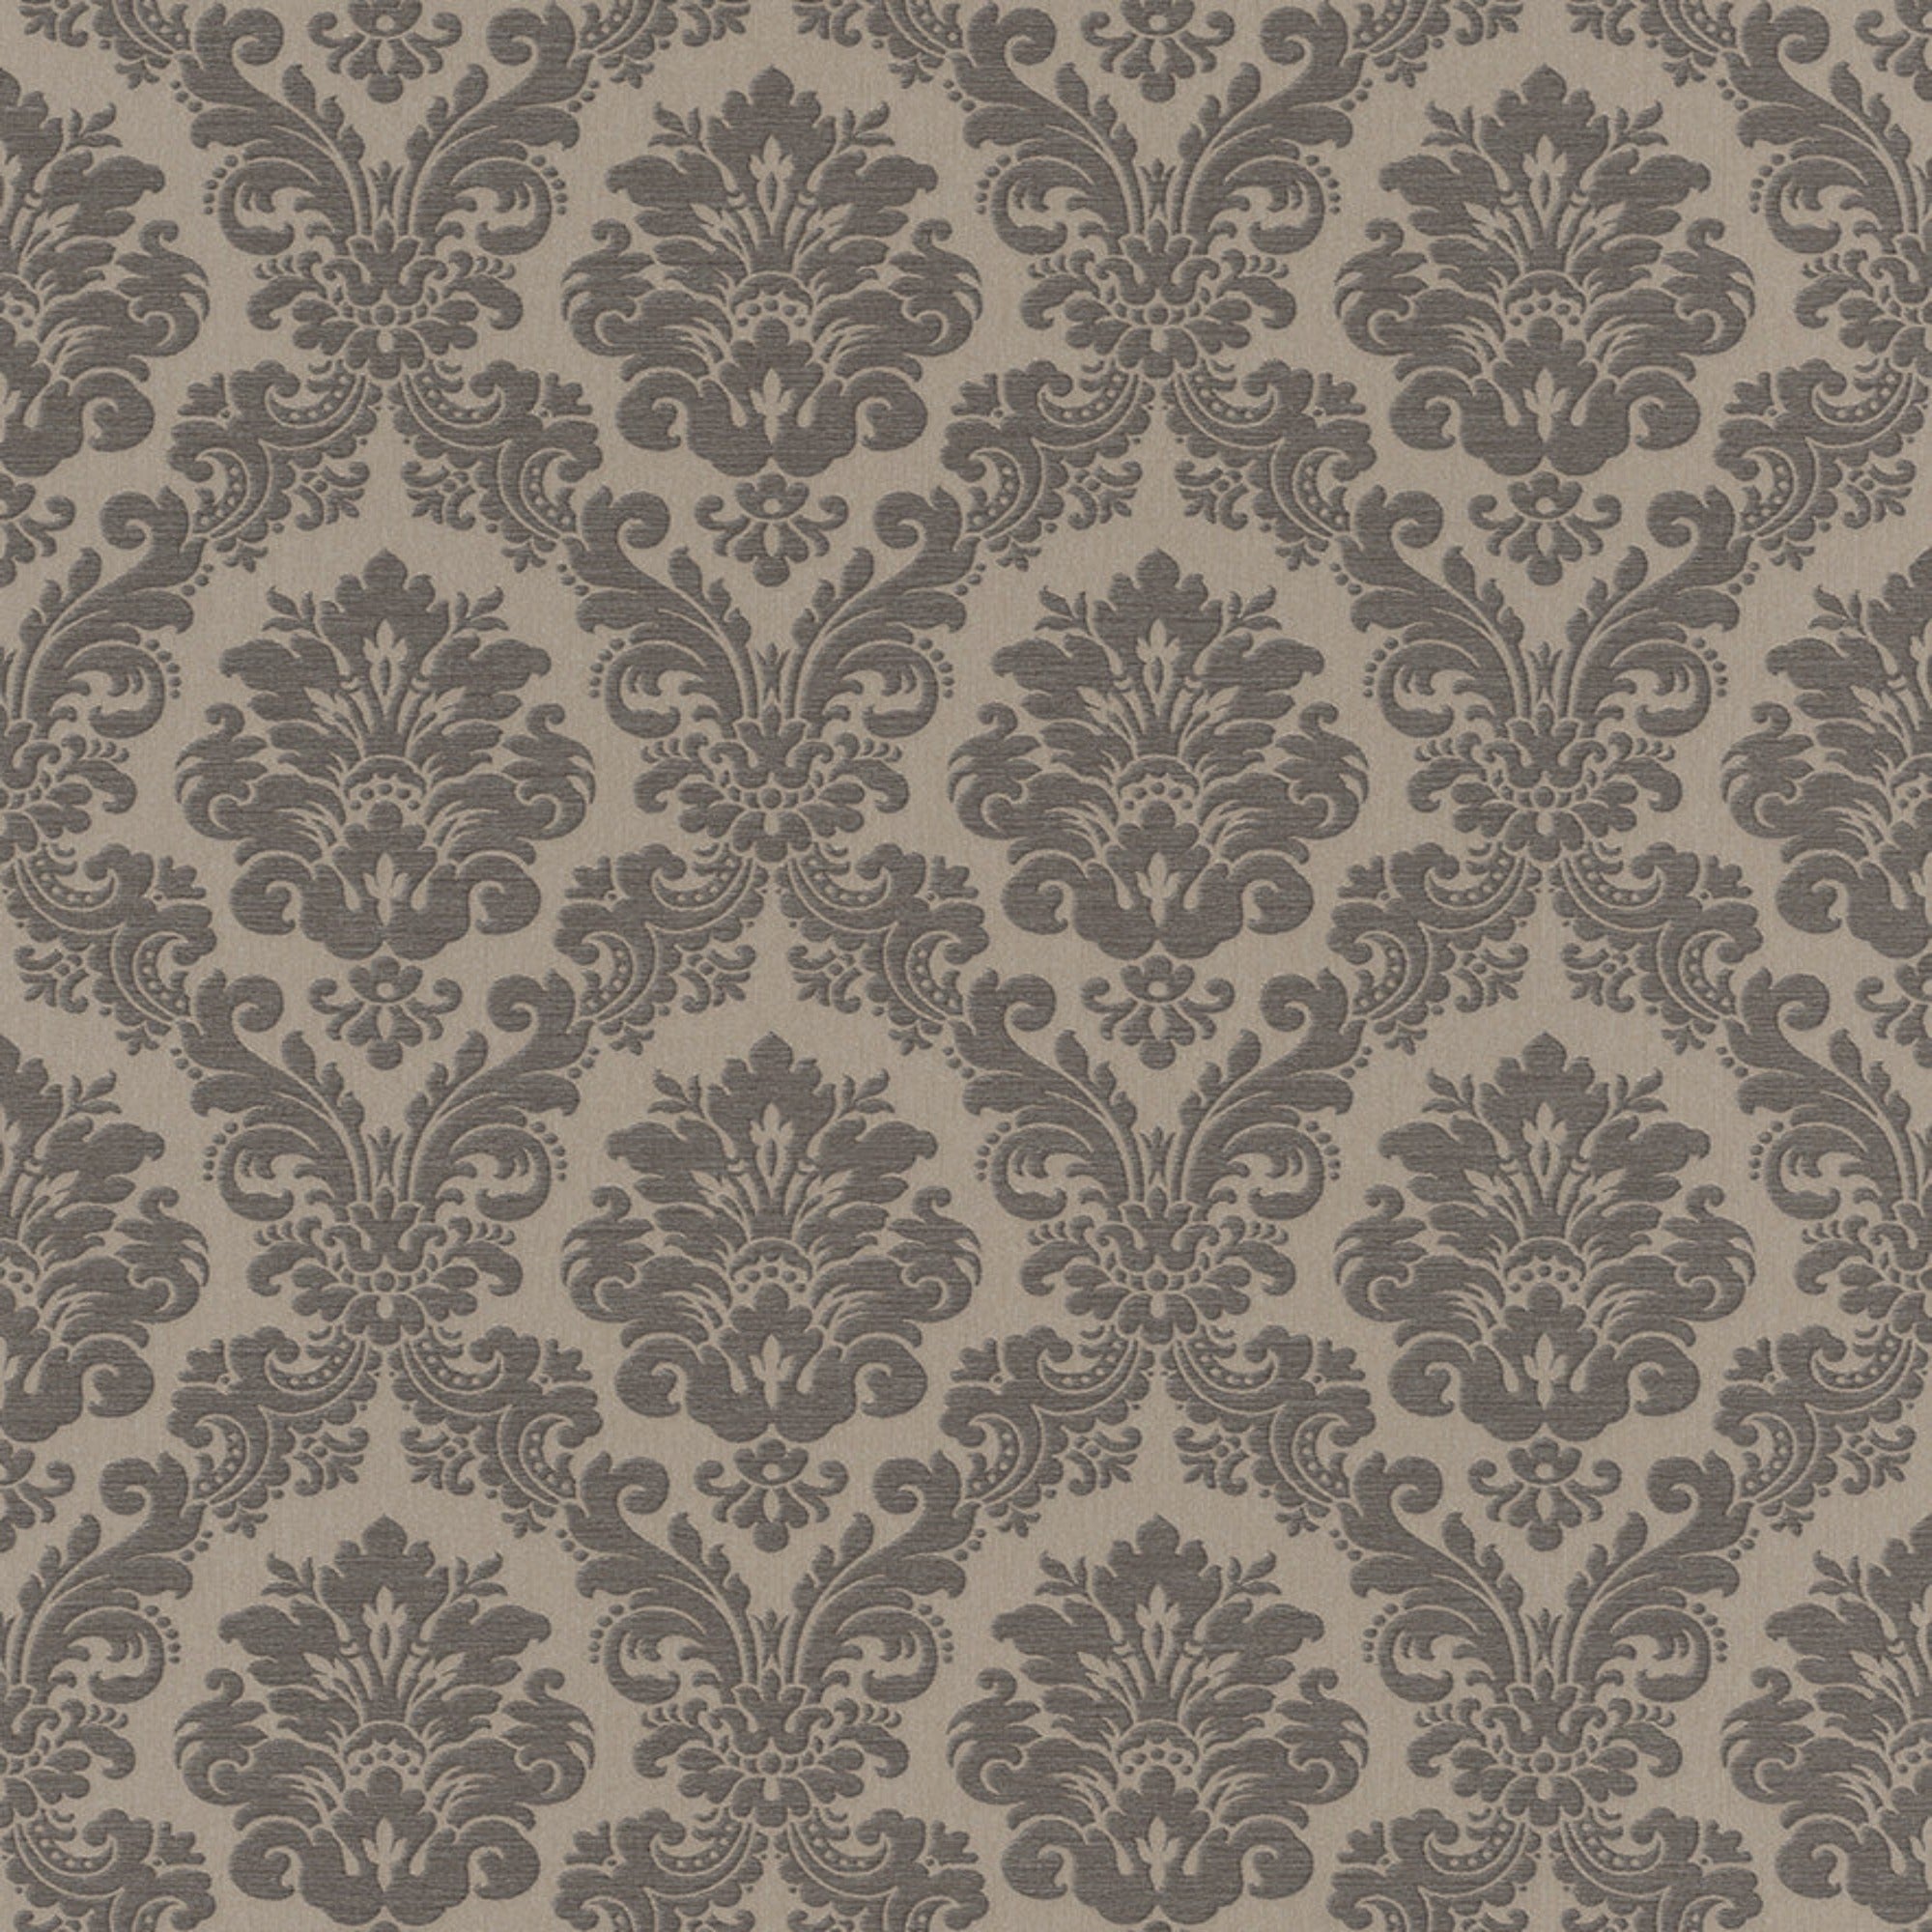 Trianon Damask Brown and Charcoal Wallpaper (Discontinued)